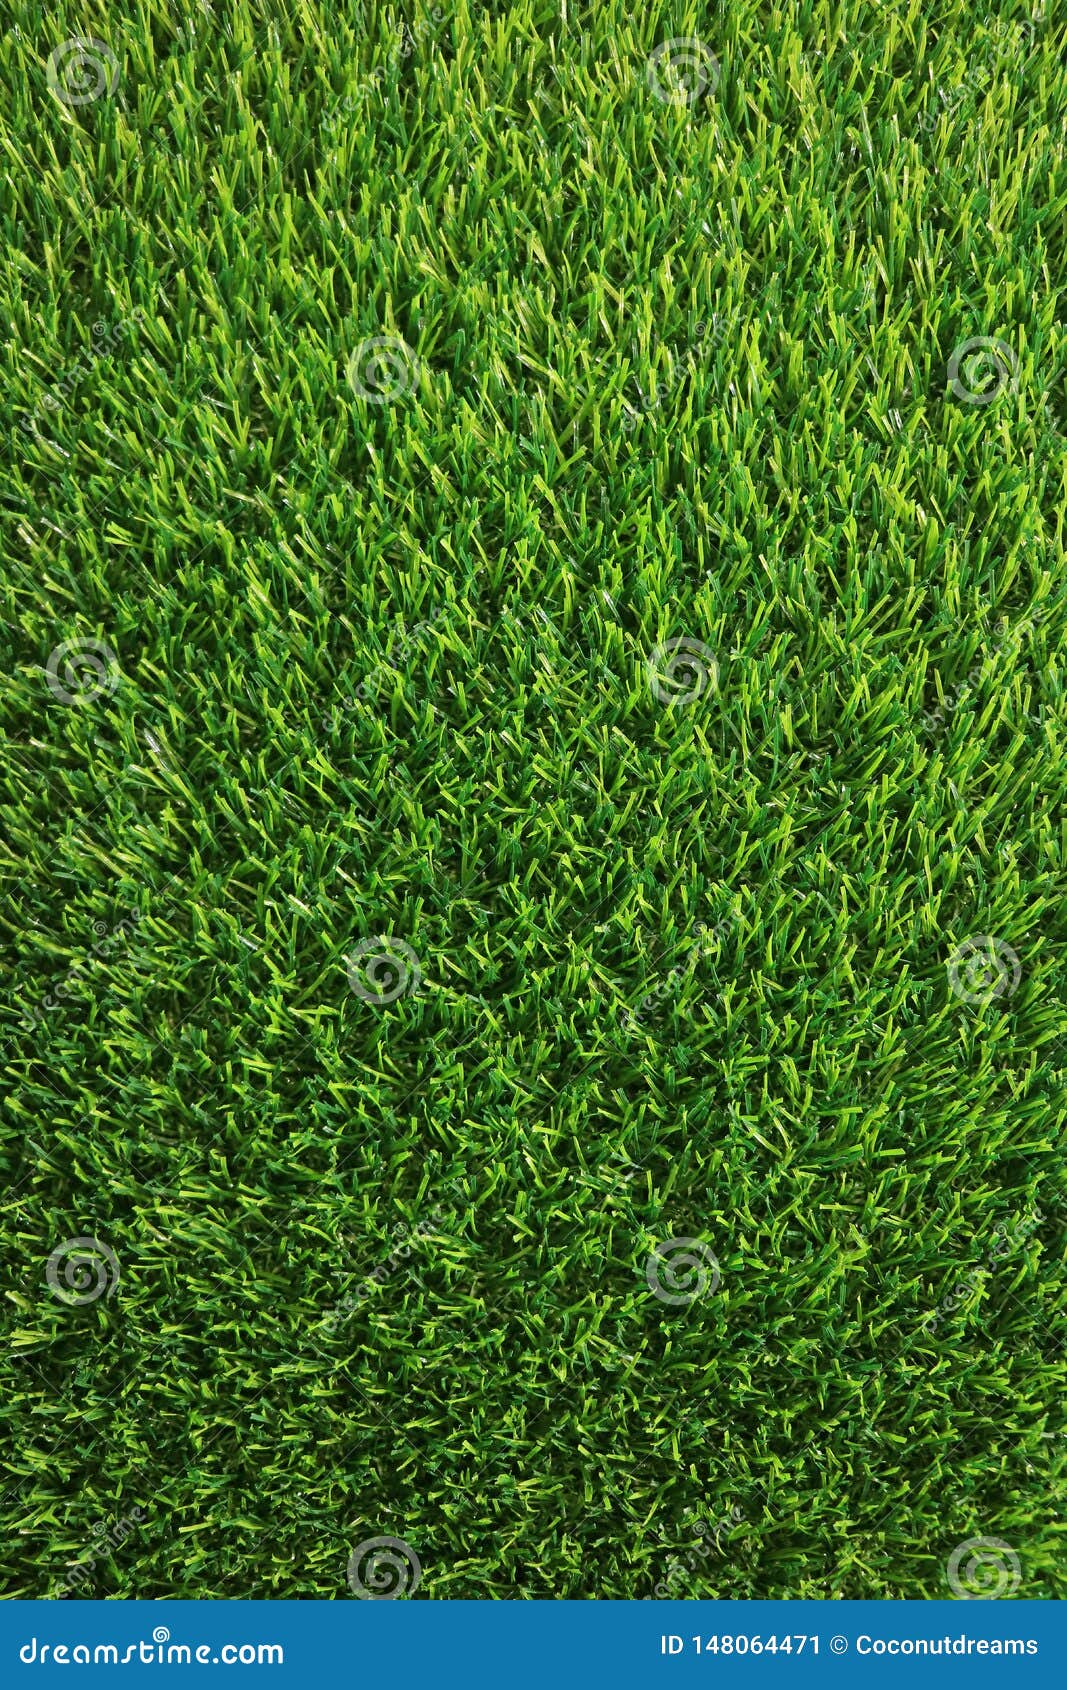 Vertical Image of Lush Green Grass Lawn for Background Stock Image